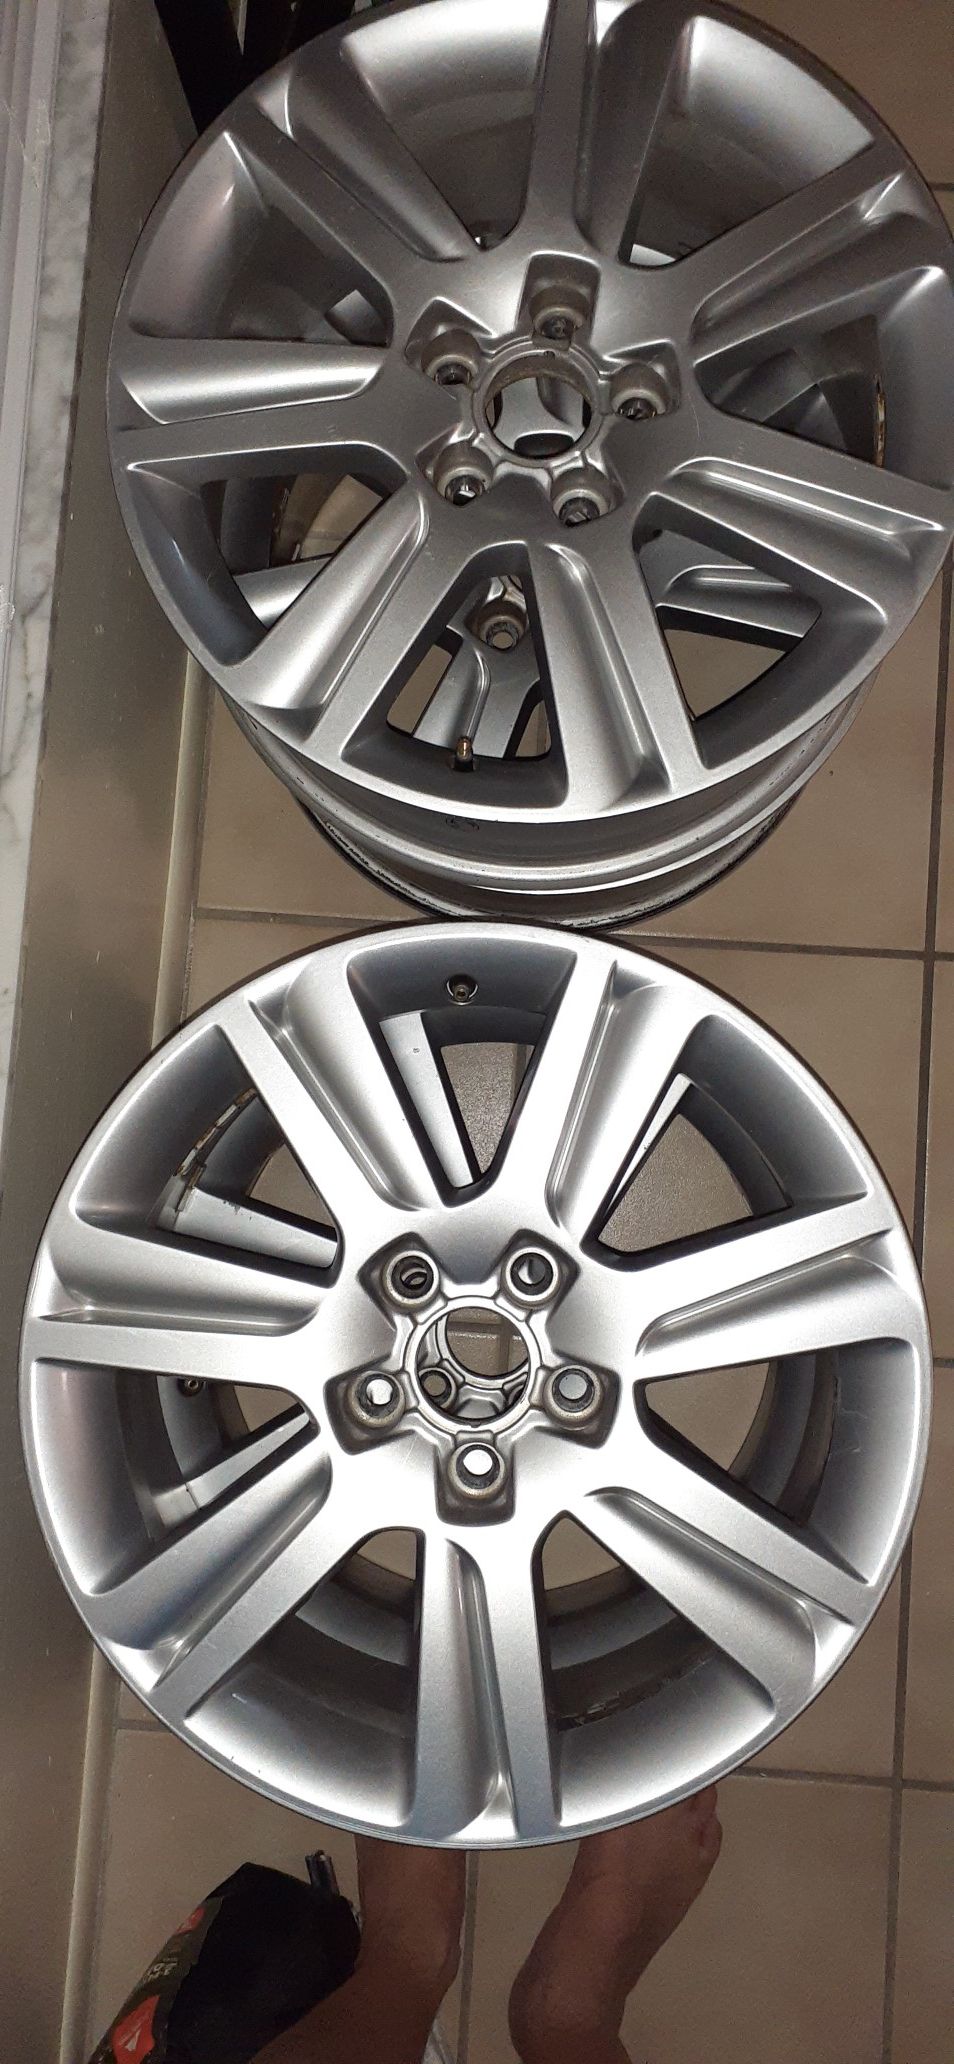 These rims are off of a 2010 Audi A4 17inc no curb rash